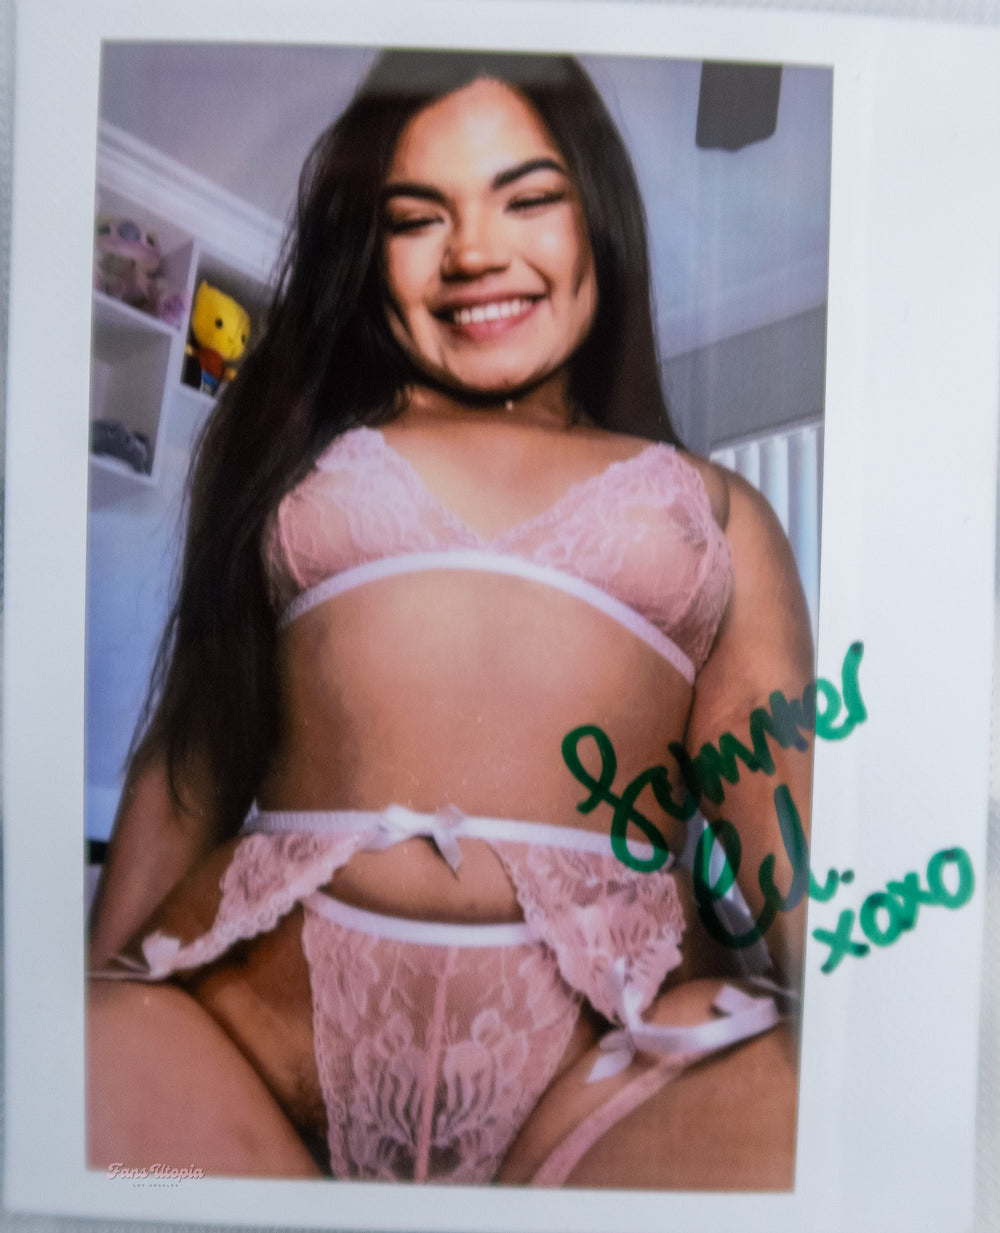 Summer Col Sticky & Oily Pink Lingerie Set + Autographed Polaroid - FANS UTOPIA